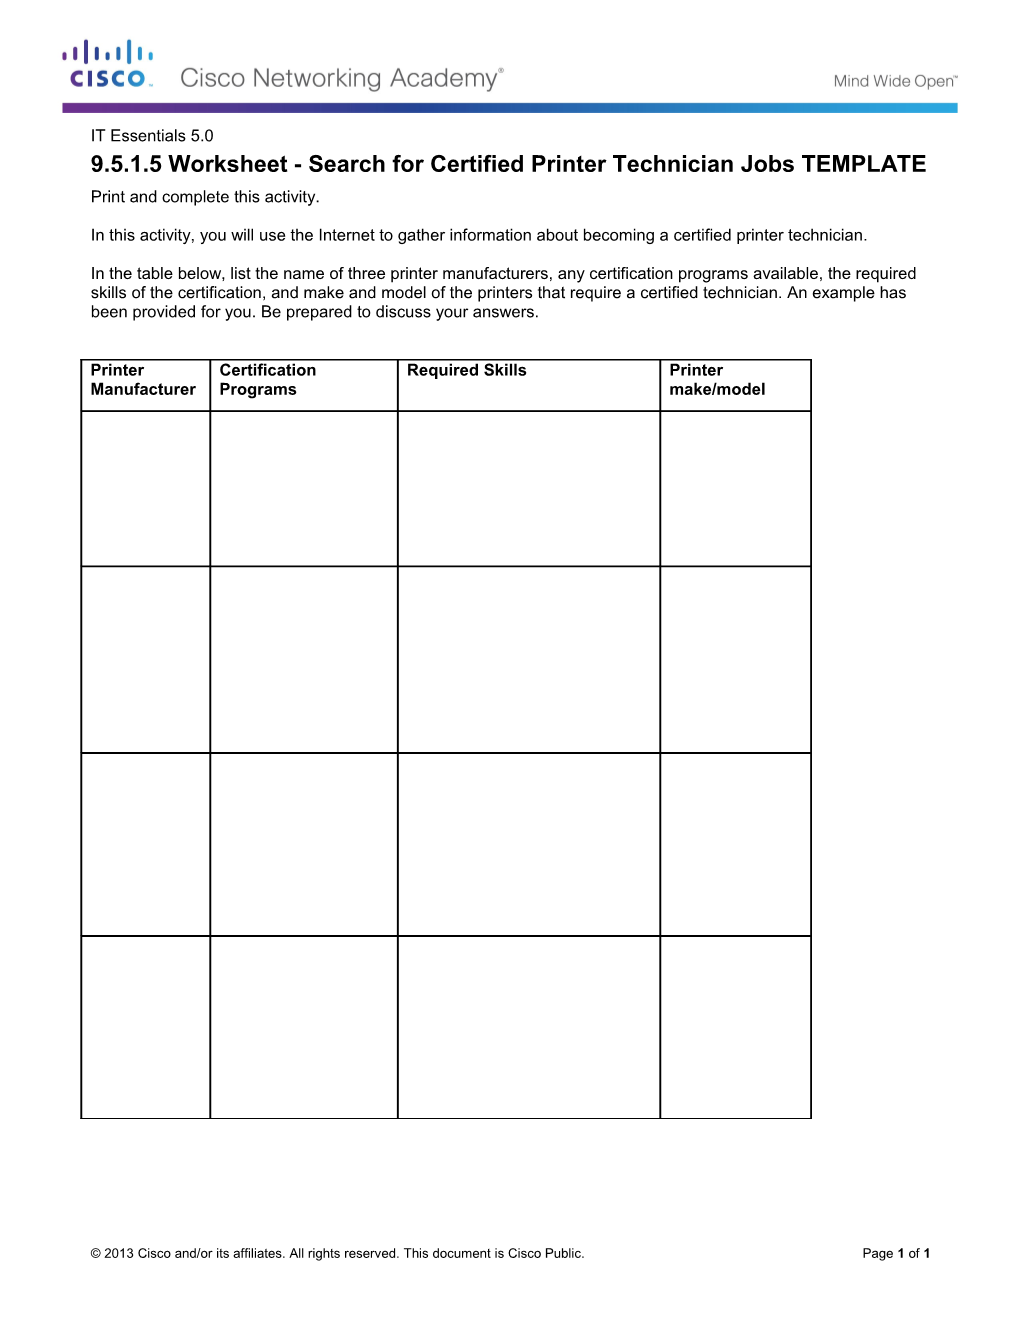 9.5.1.5 Worksheet - Search for Certified Printer Technician Jobs TEMPLATE